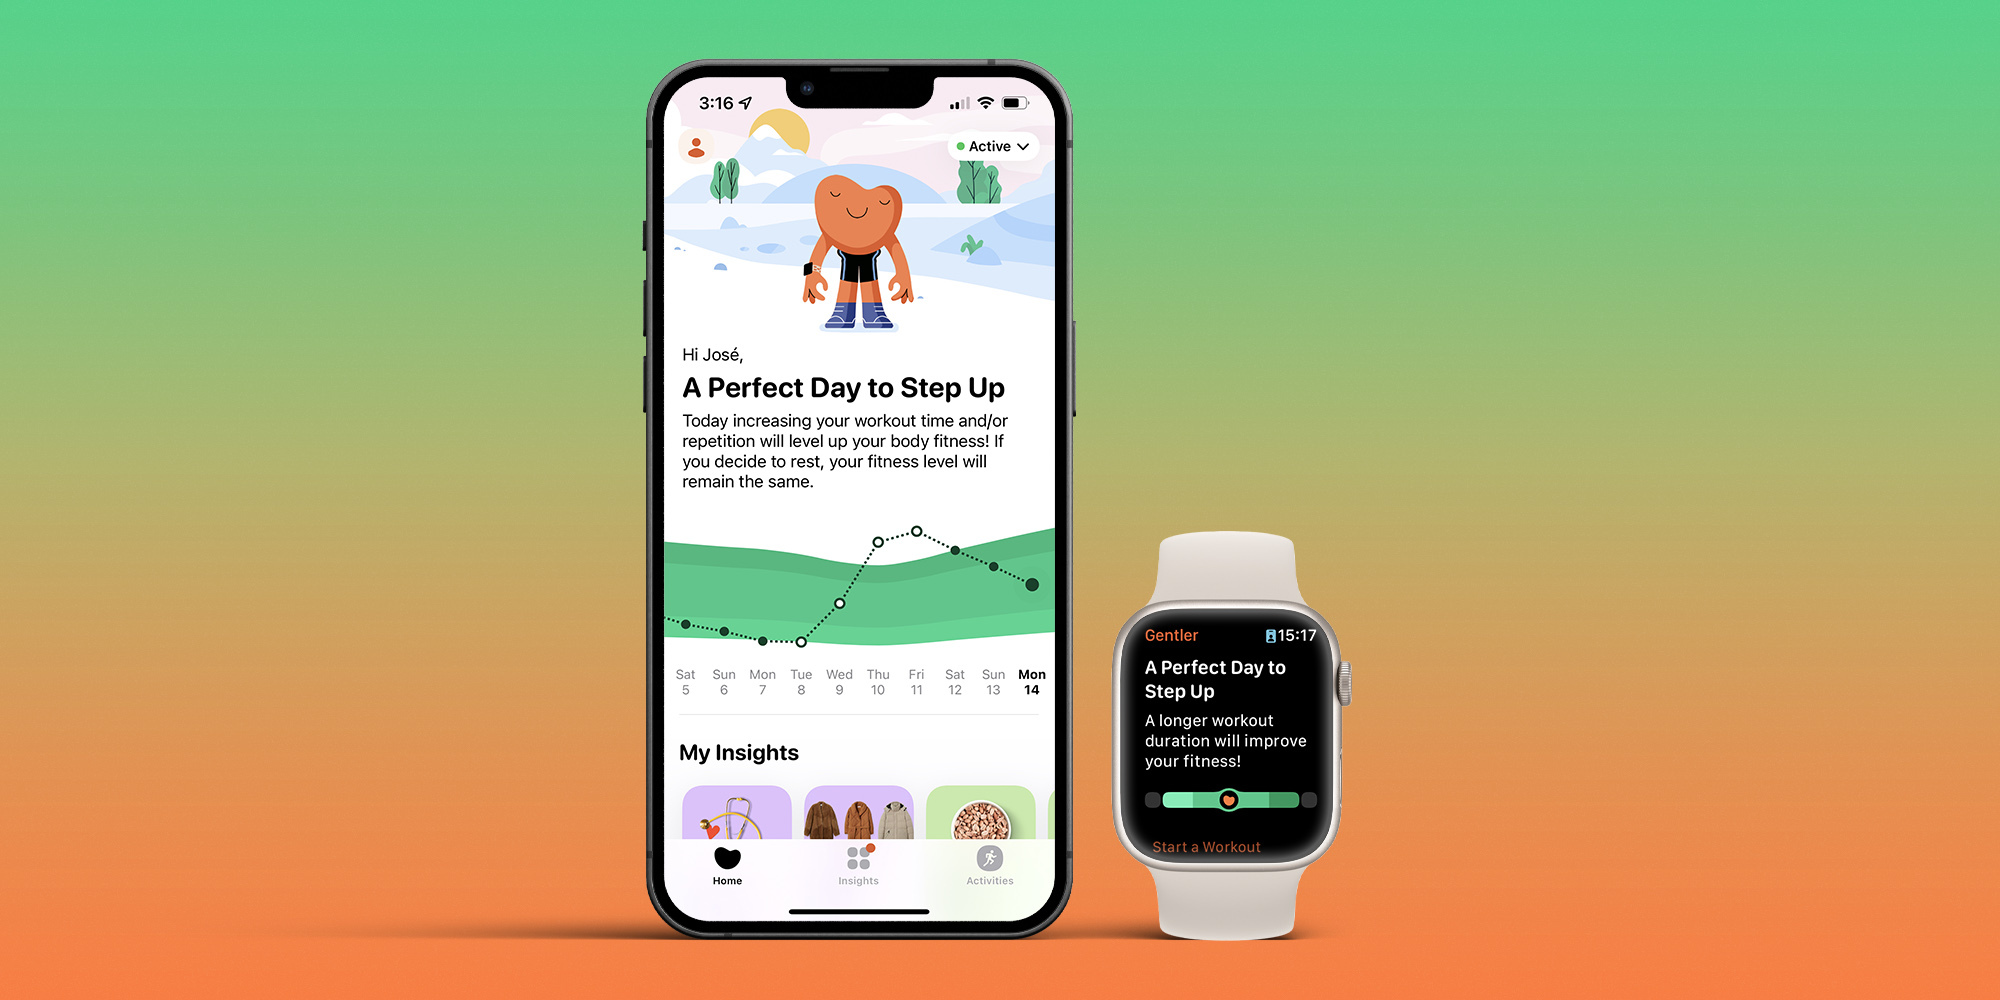 Gentler Streak for Apple Watch brings compassion to fitness goals - 9to5Mac